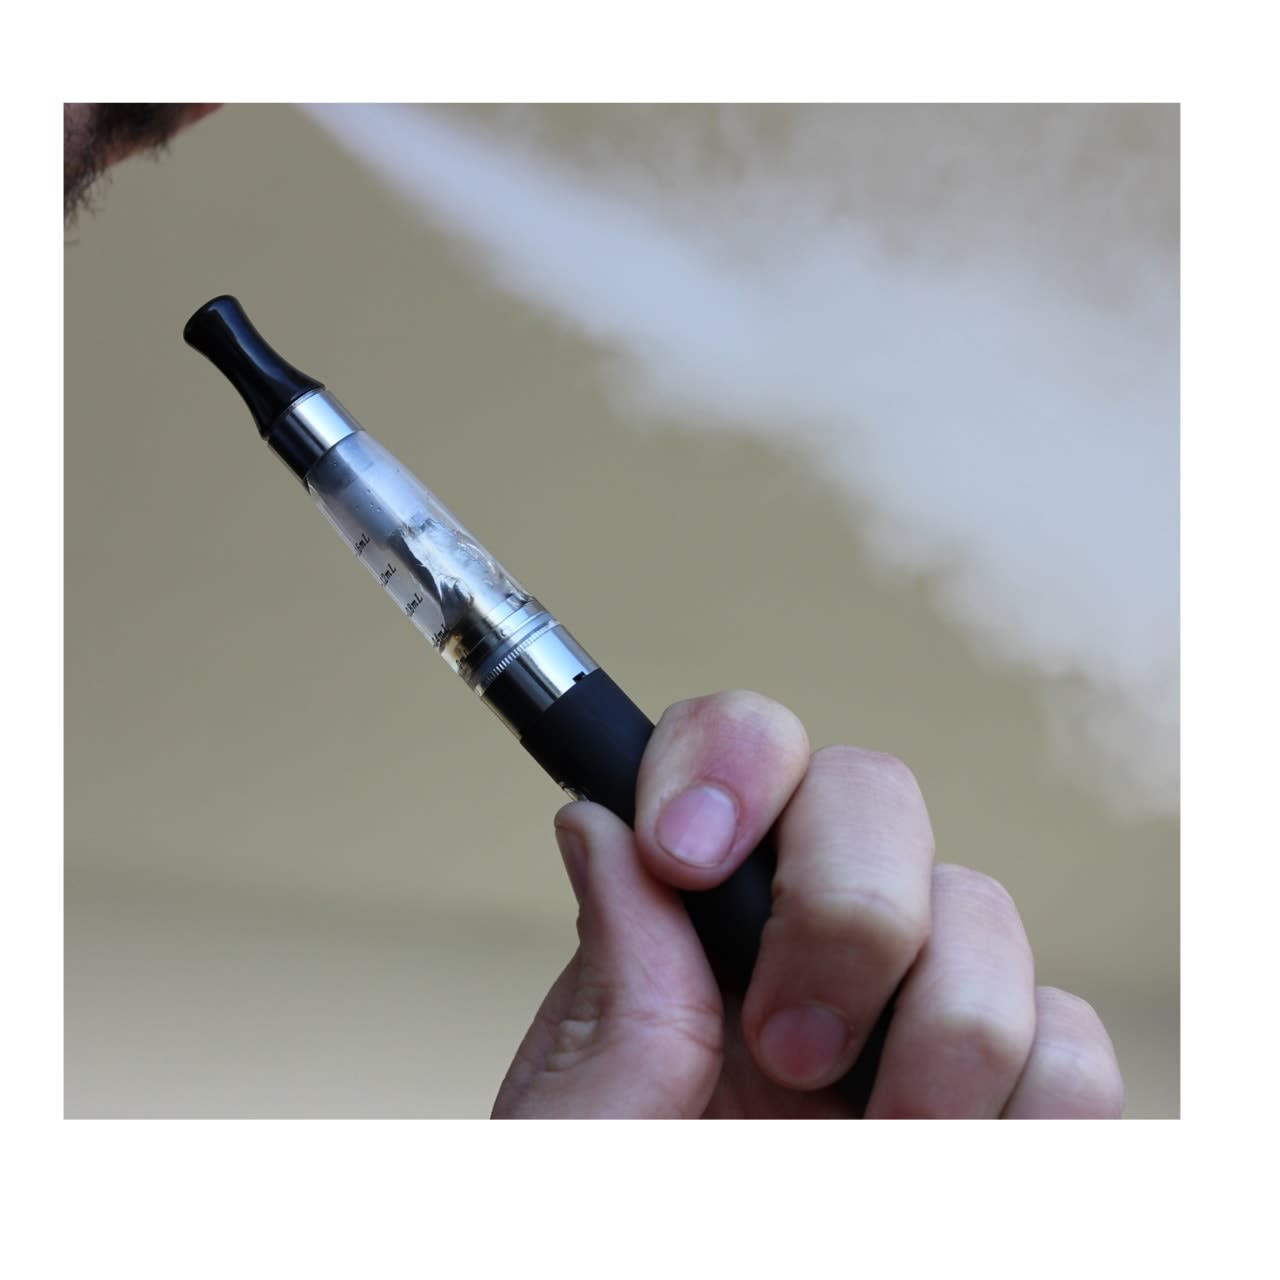 A state appellate put a temporary halt on a ban to stop the sale of flavored e-cigarettes in New York.